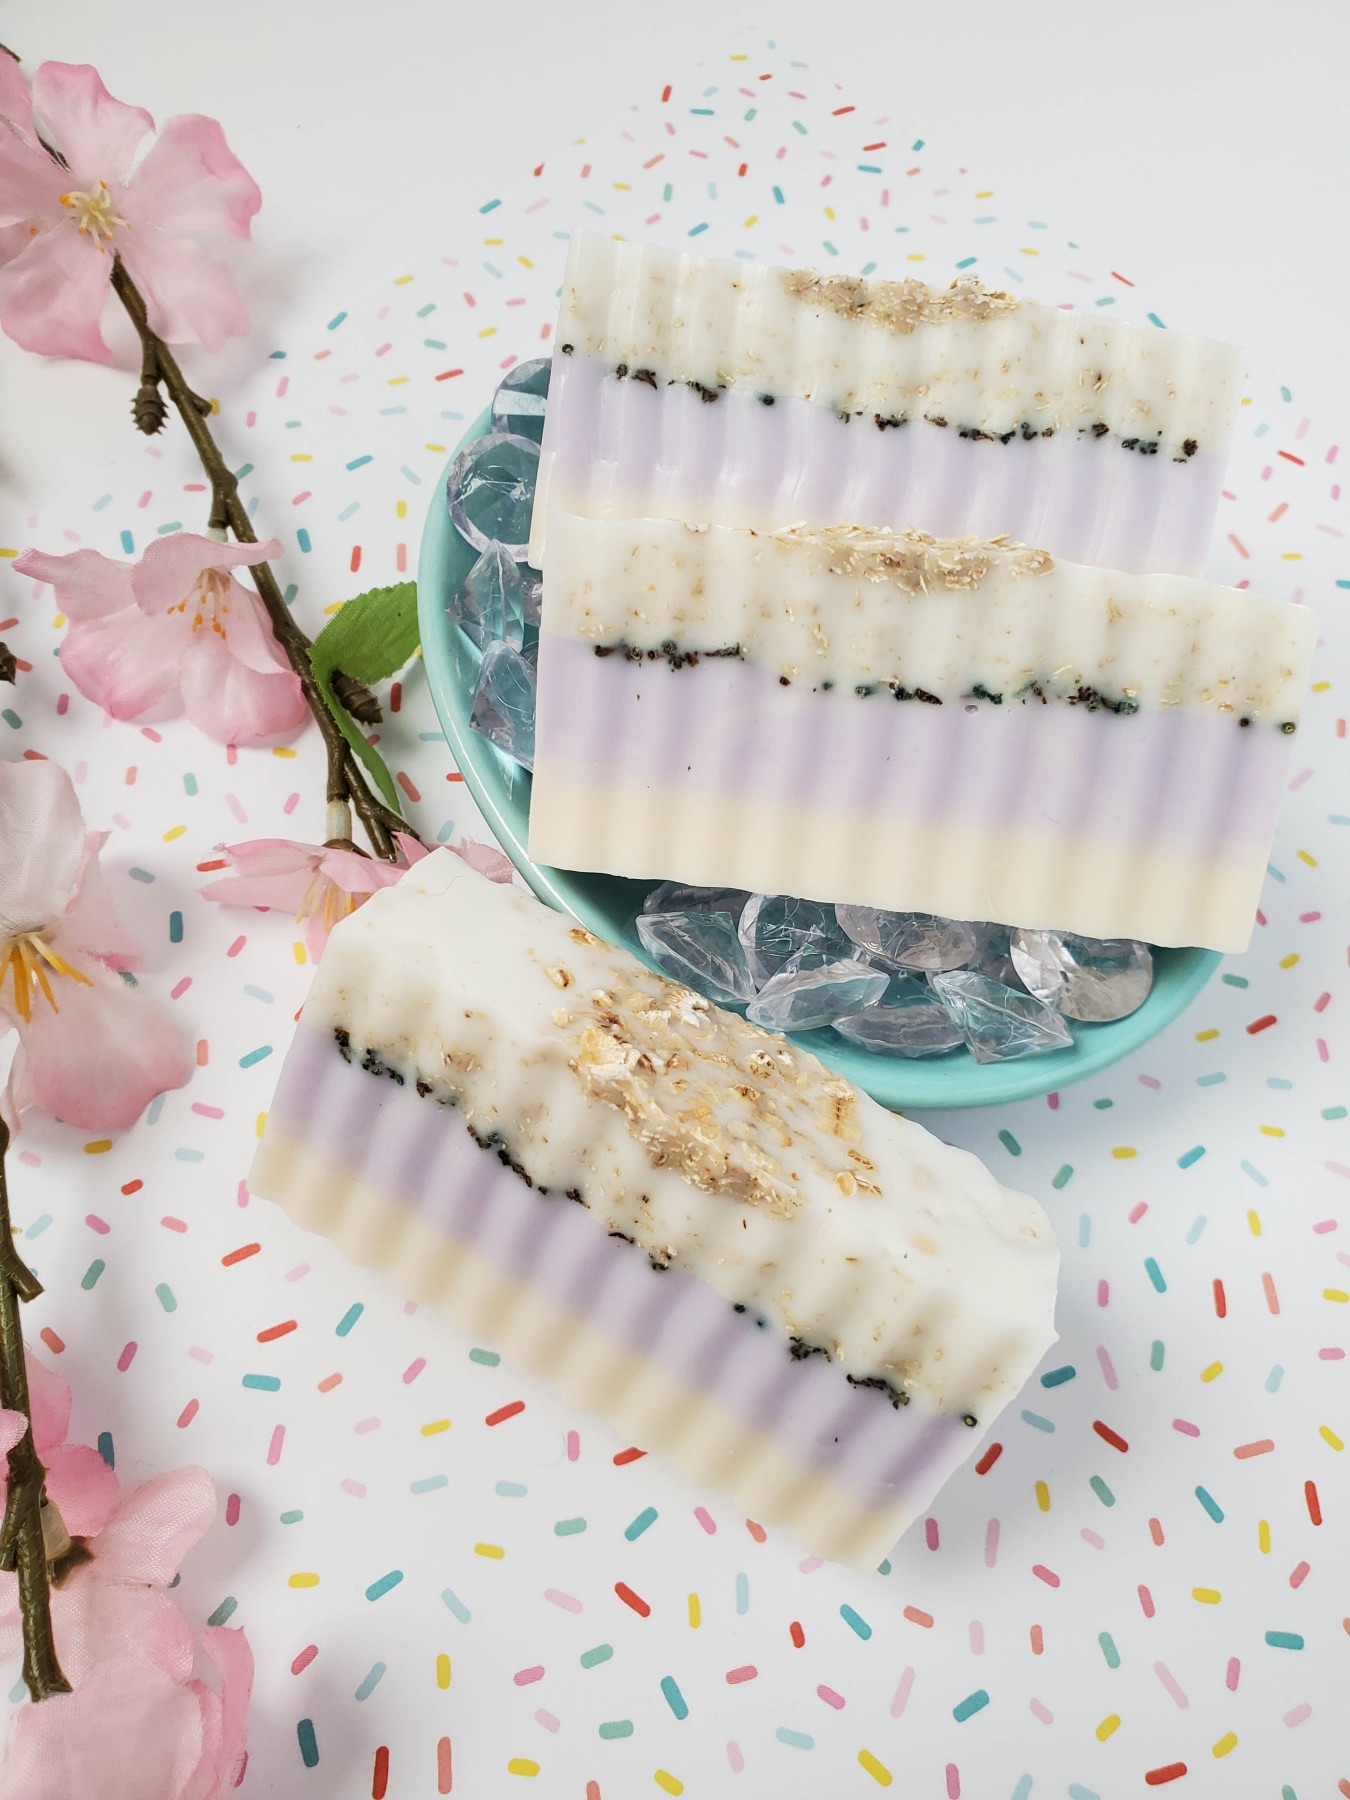 finished goats milk soap with lavender honey and oats